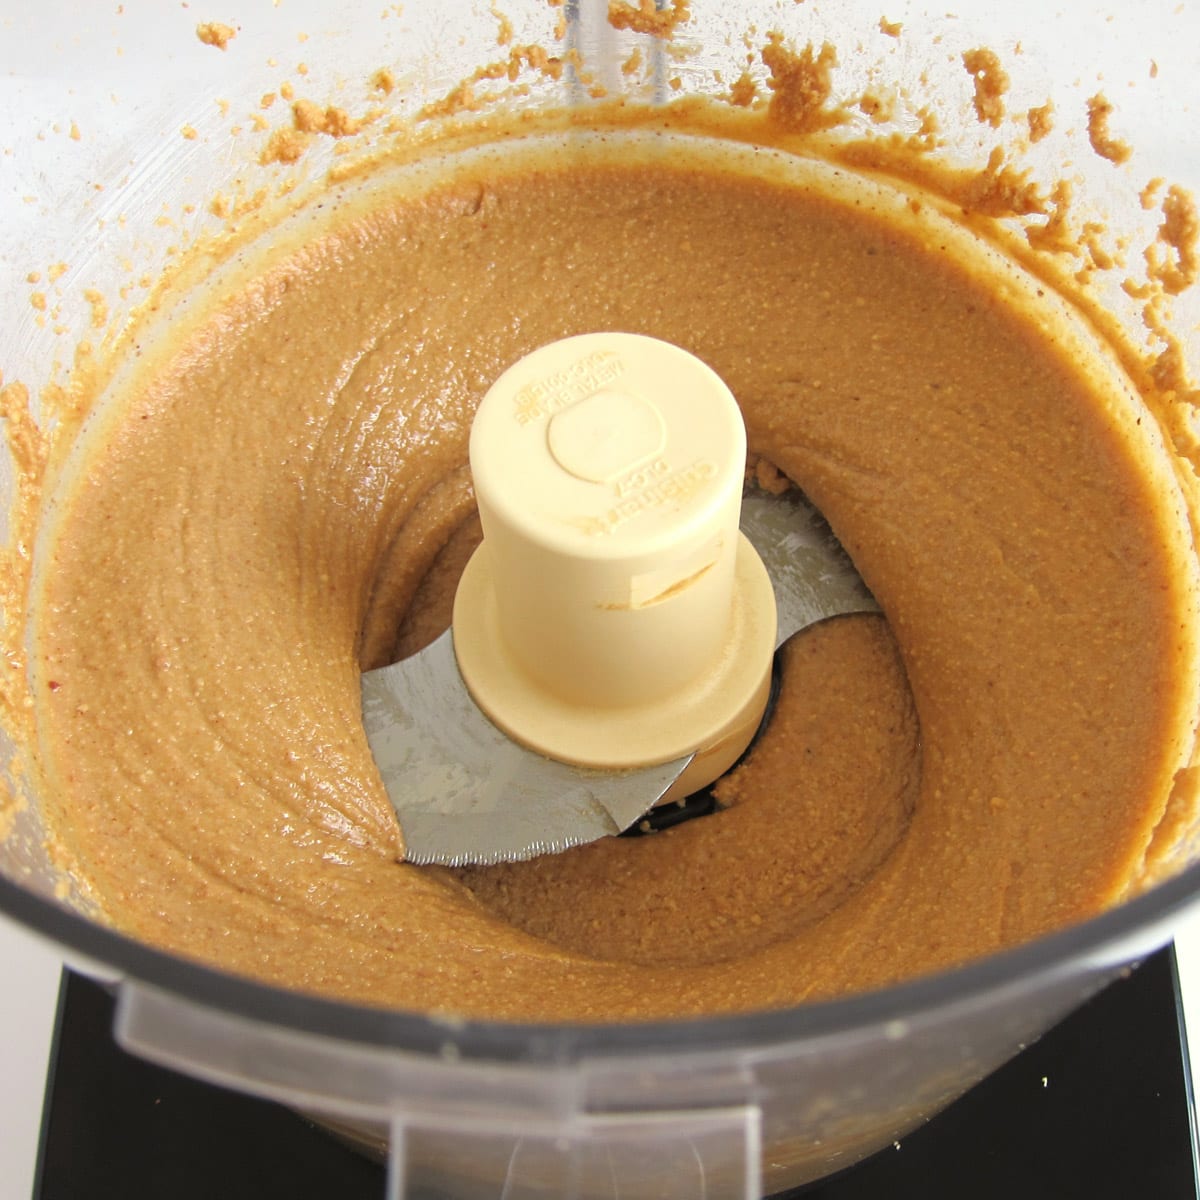 smooth and creamy homemade peanut butter made in a food processor.